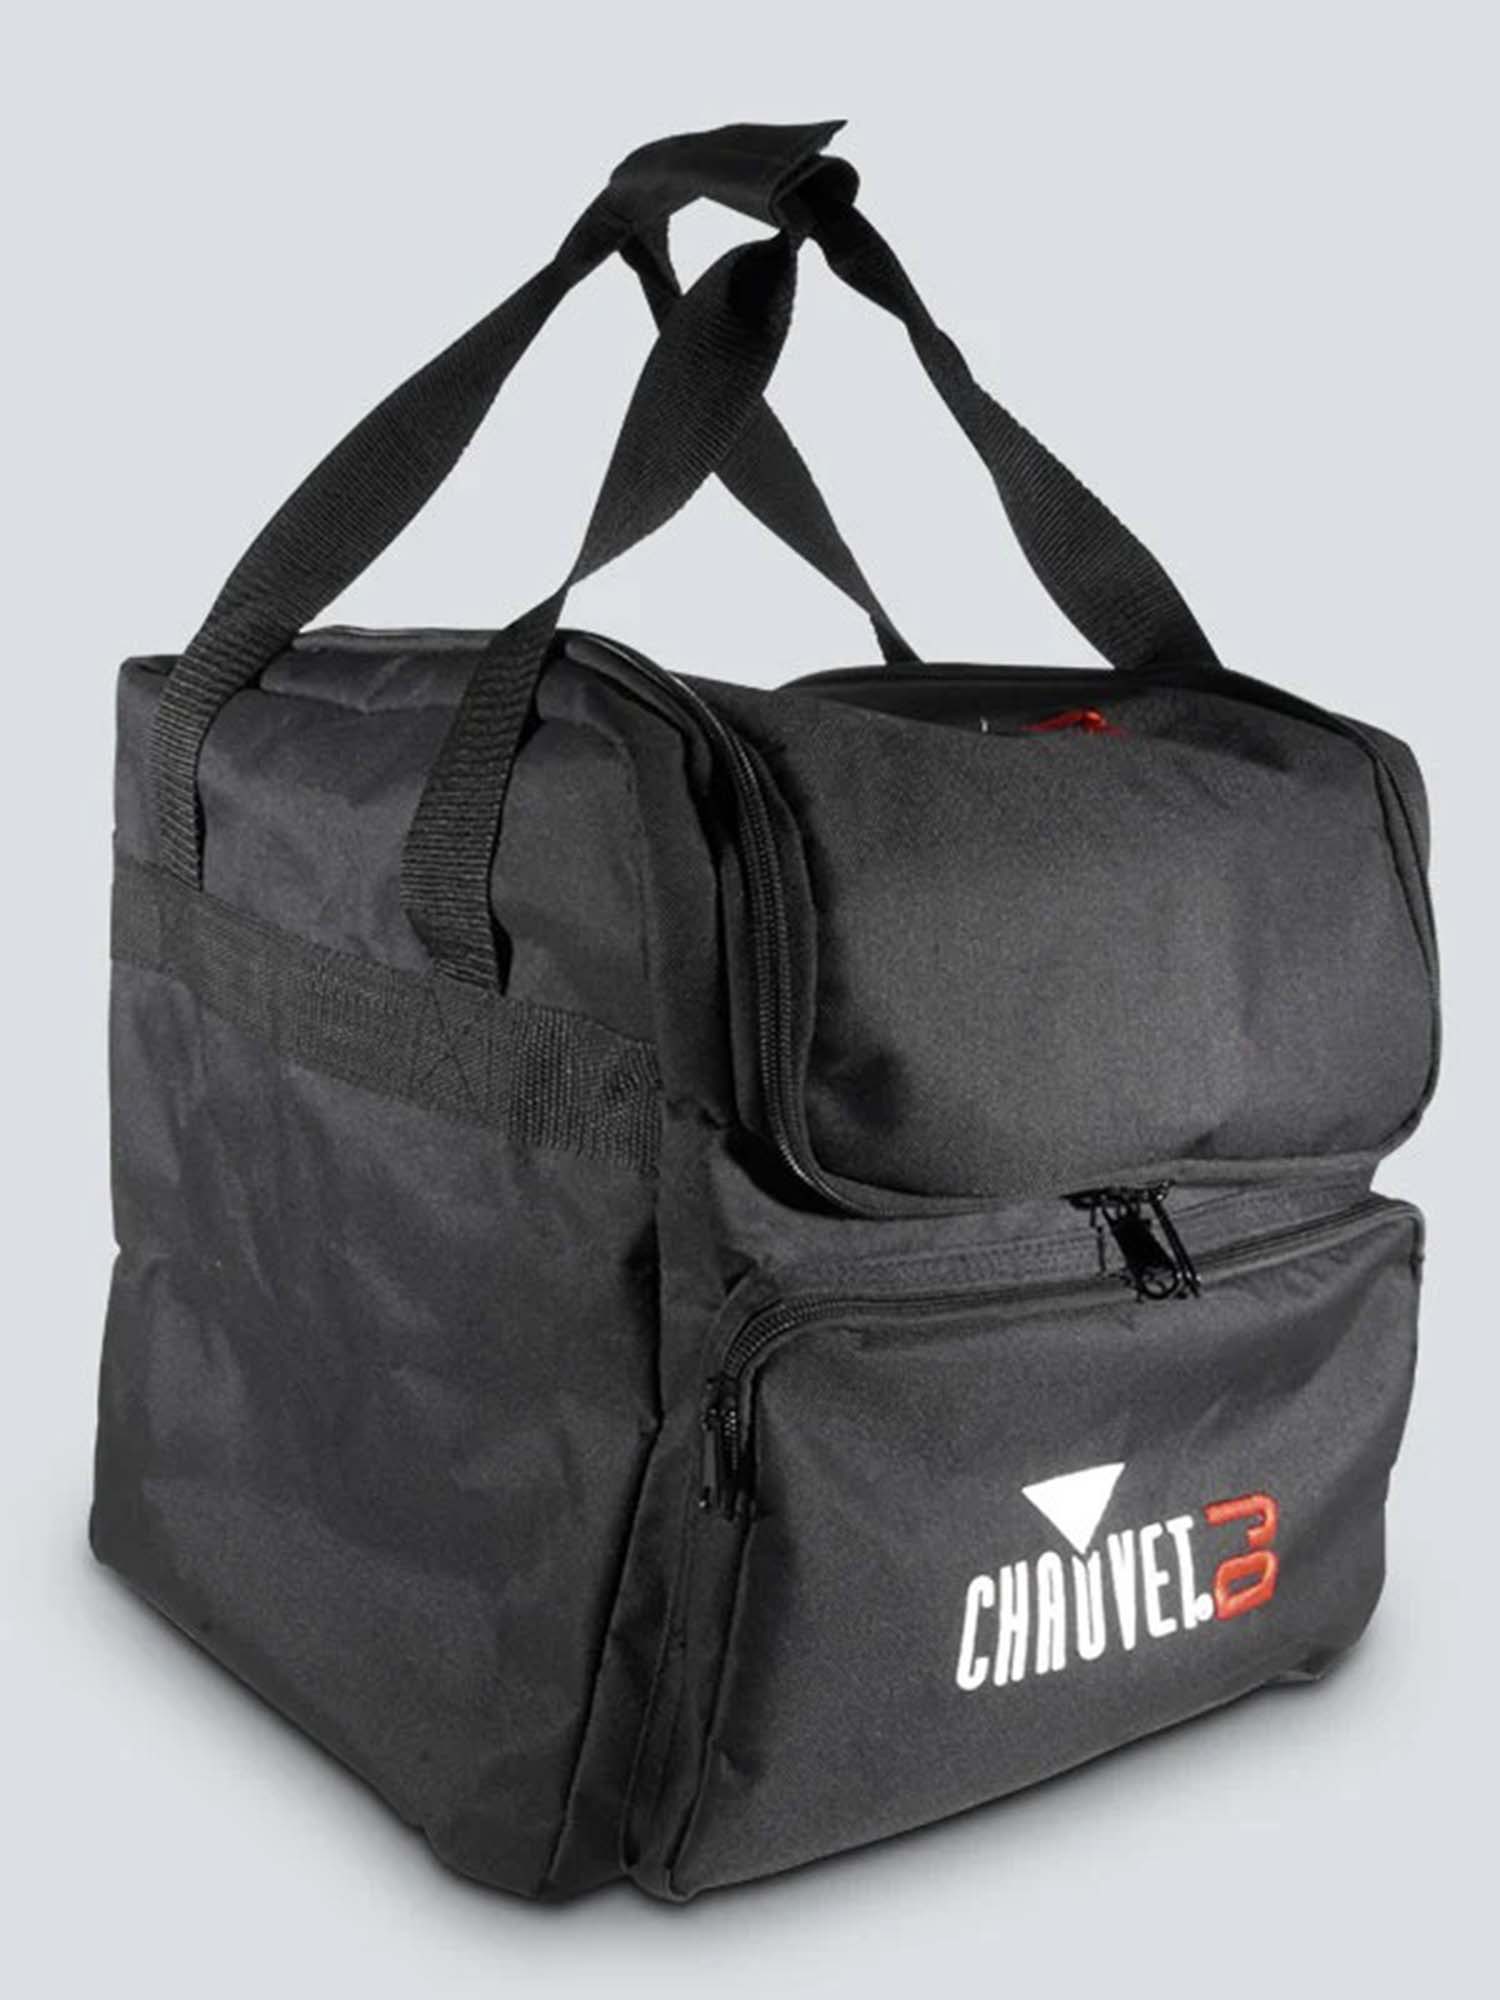 Chauvet DJ CHS-40, VIP Travel Gear Bag for DJ Lights Cables Clamps and Accessories - Hollywood DJ